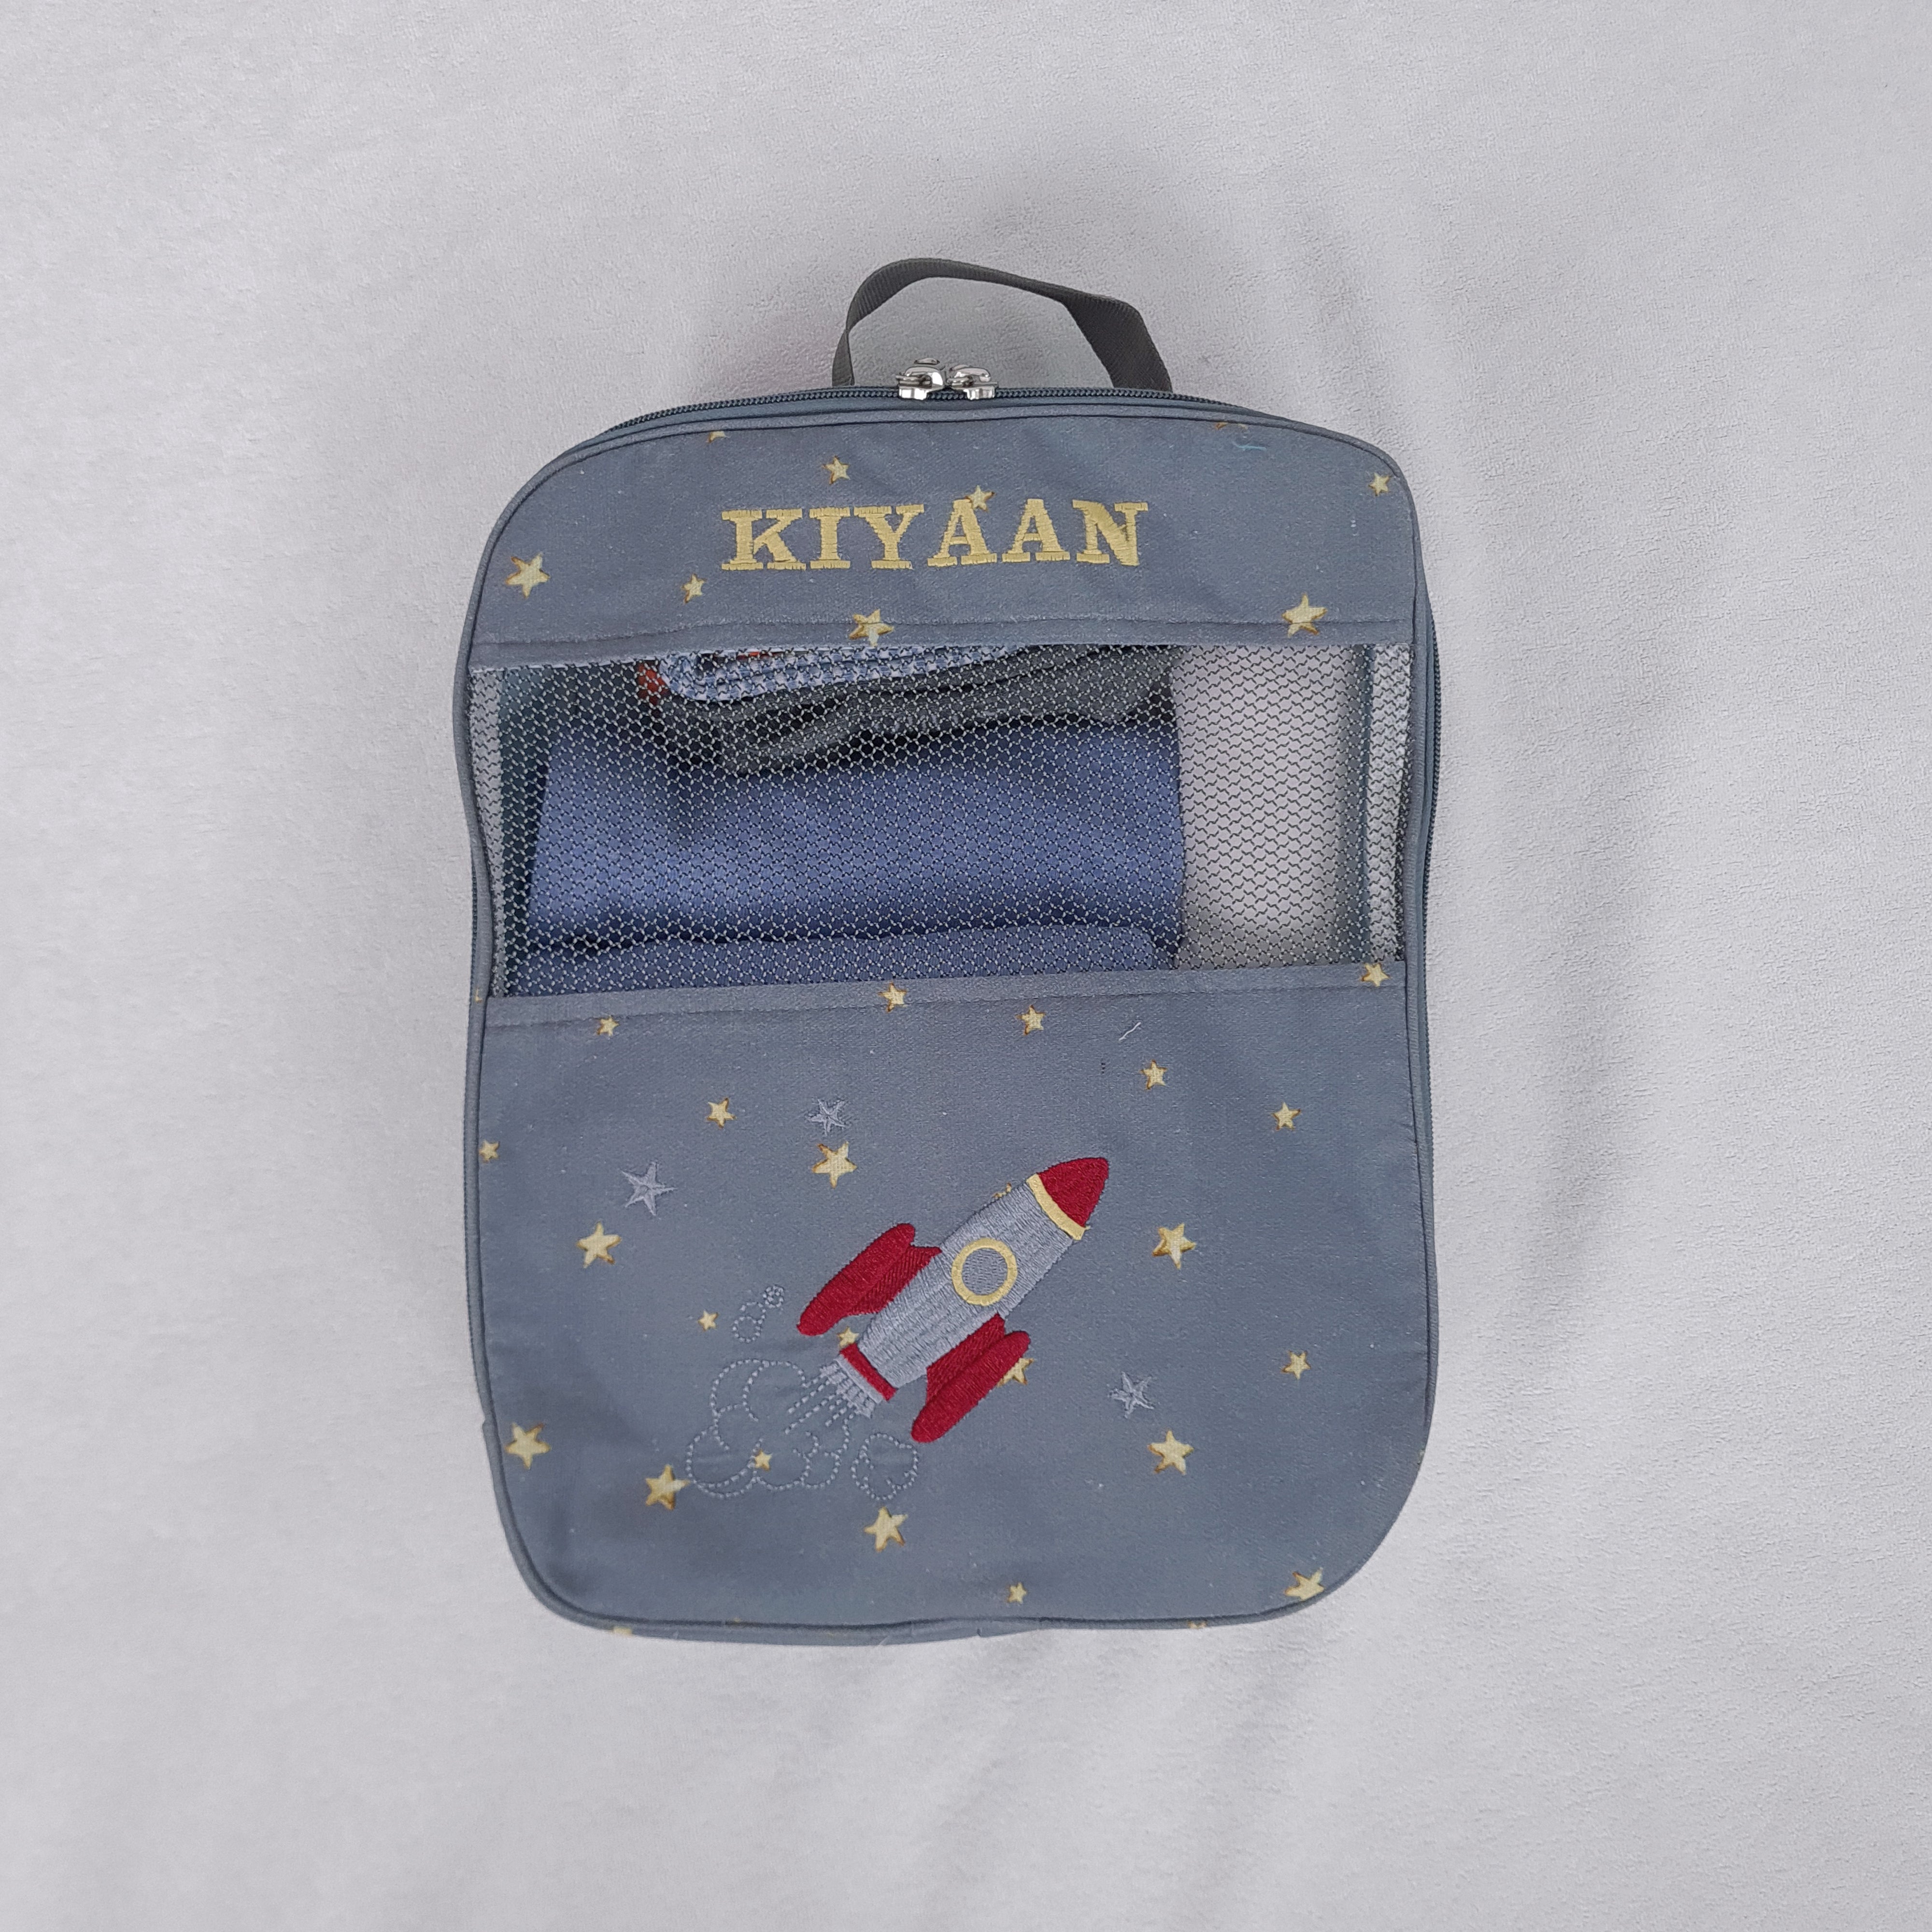 To the Moon And Back Organizer Bag